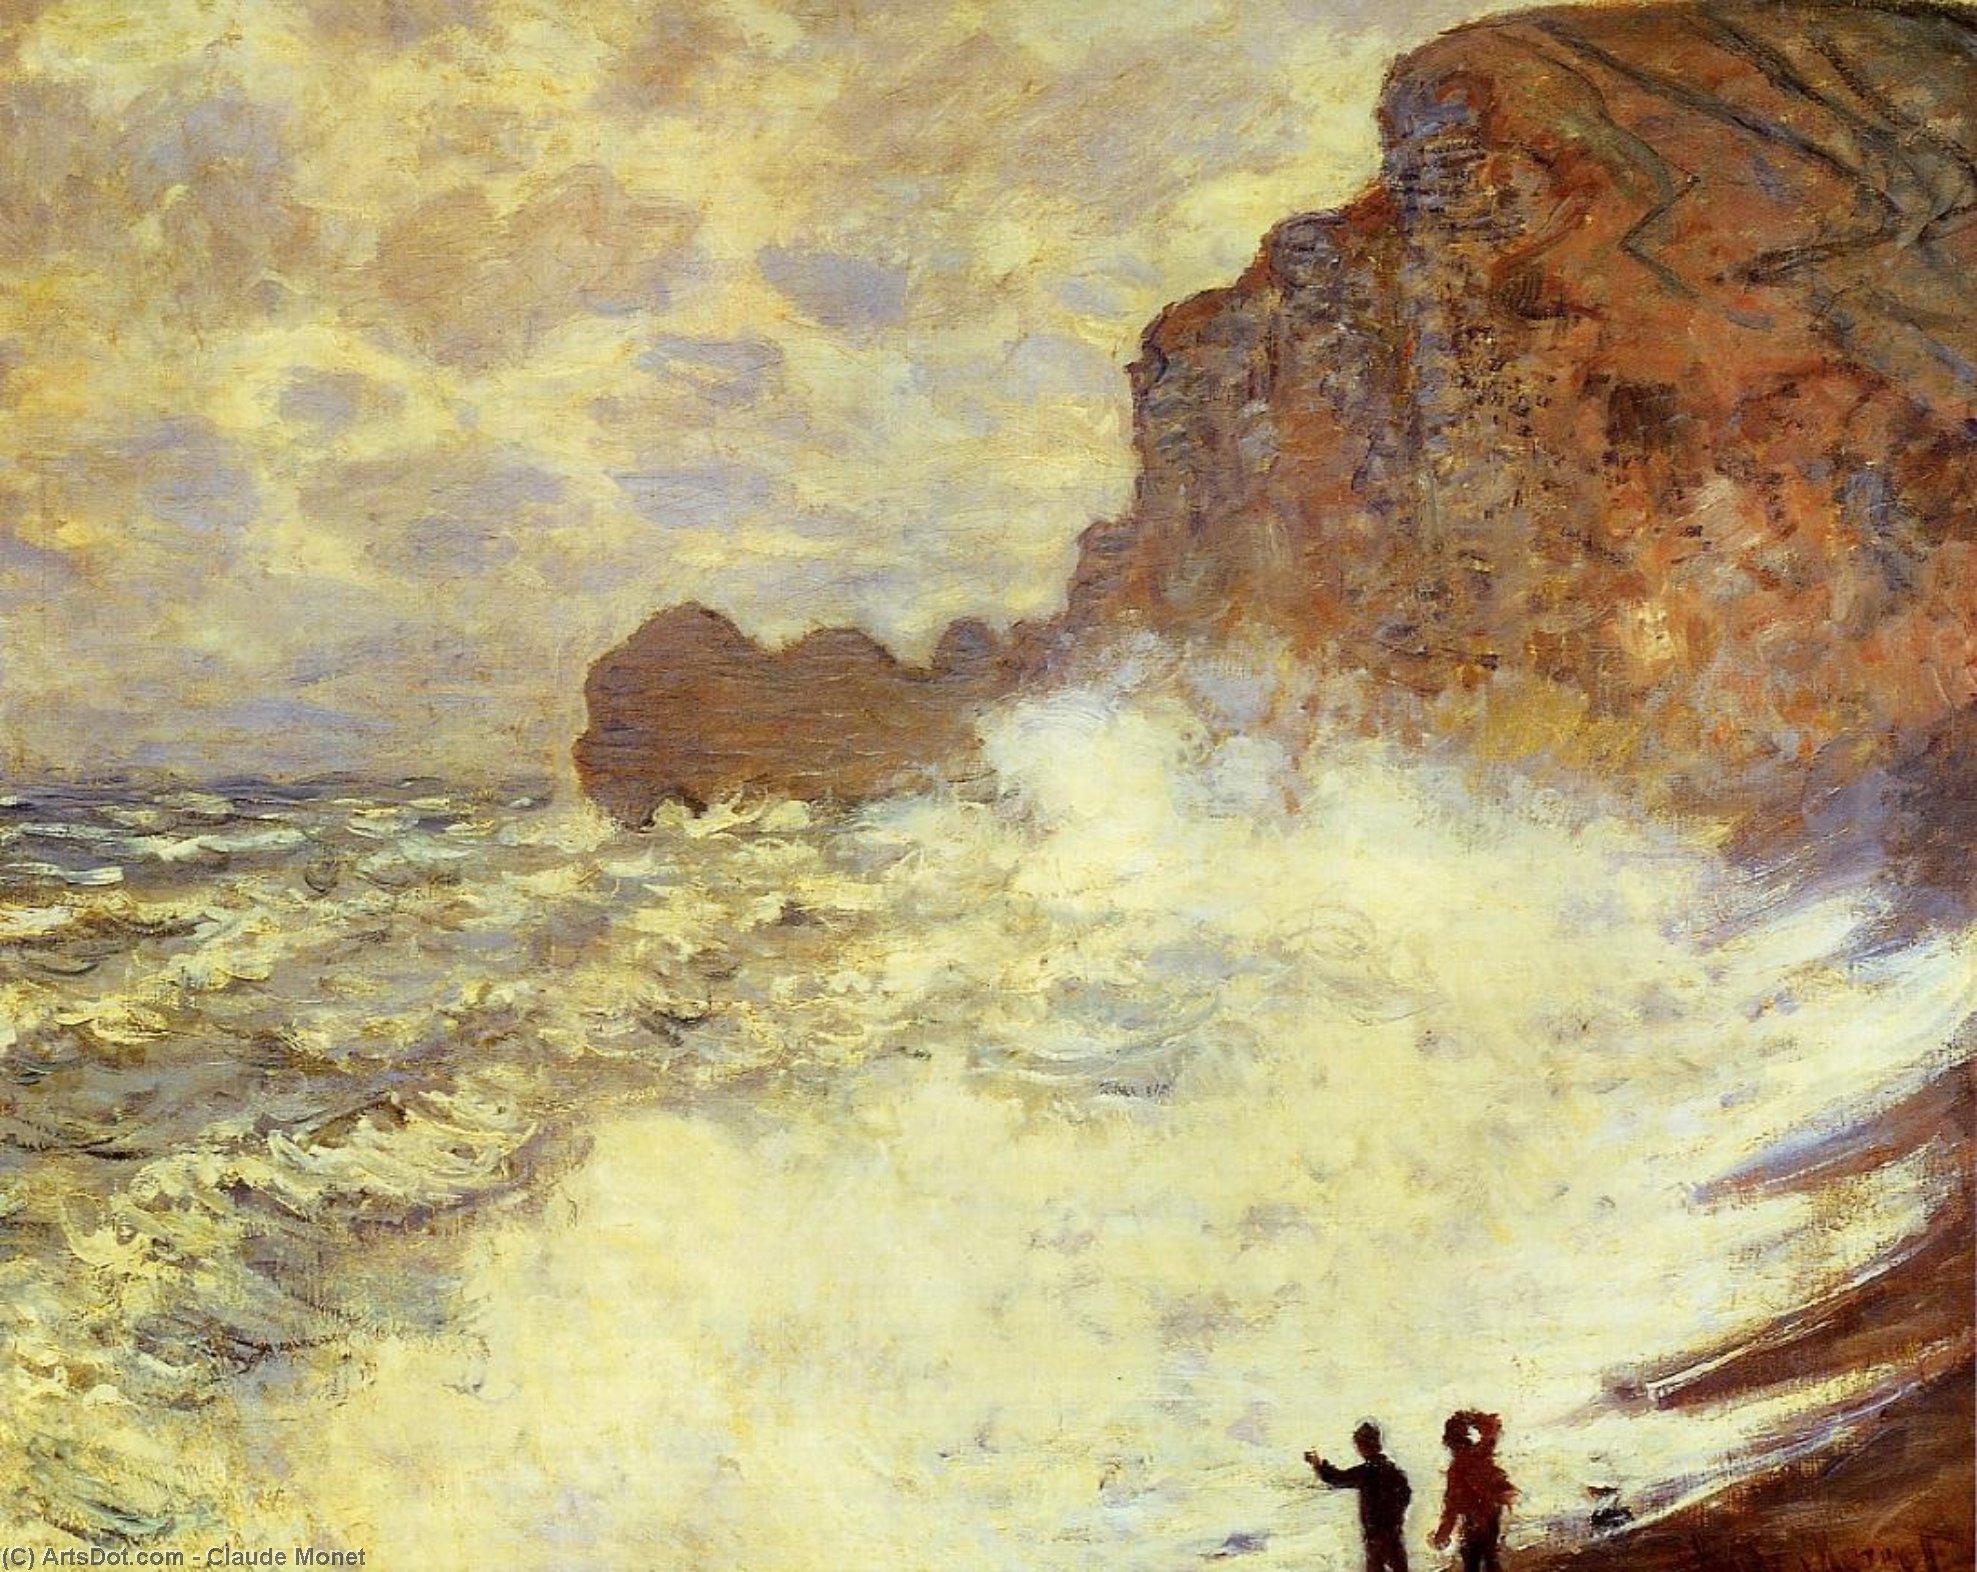 Order Oil Painting Replica Stormy Weather at Etretat, 1883 by Claude Monet (1840-1926, France) | ArtsDot.com